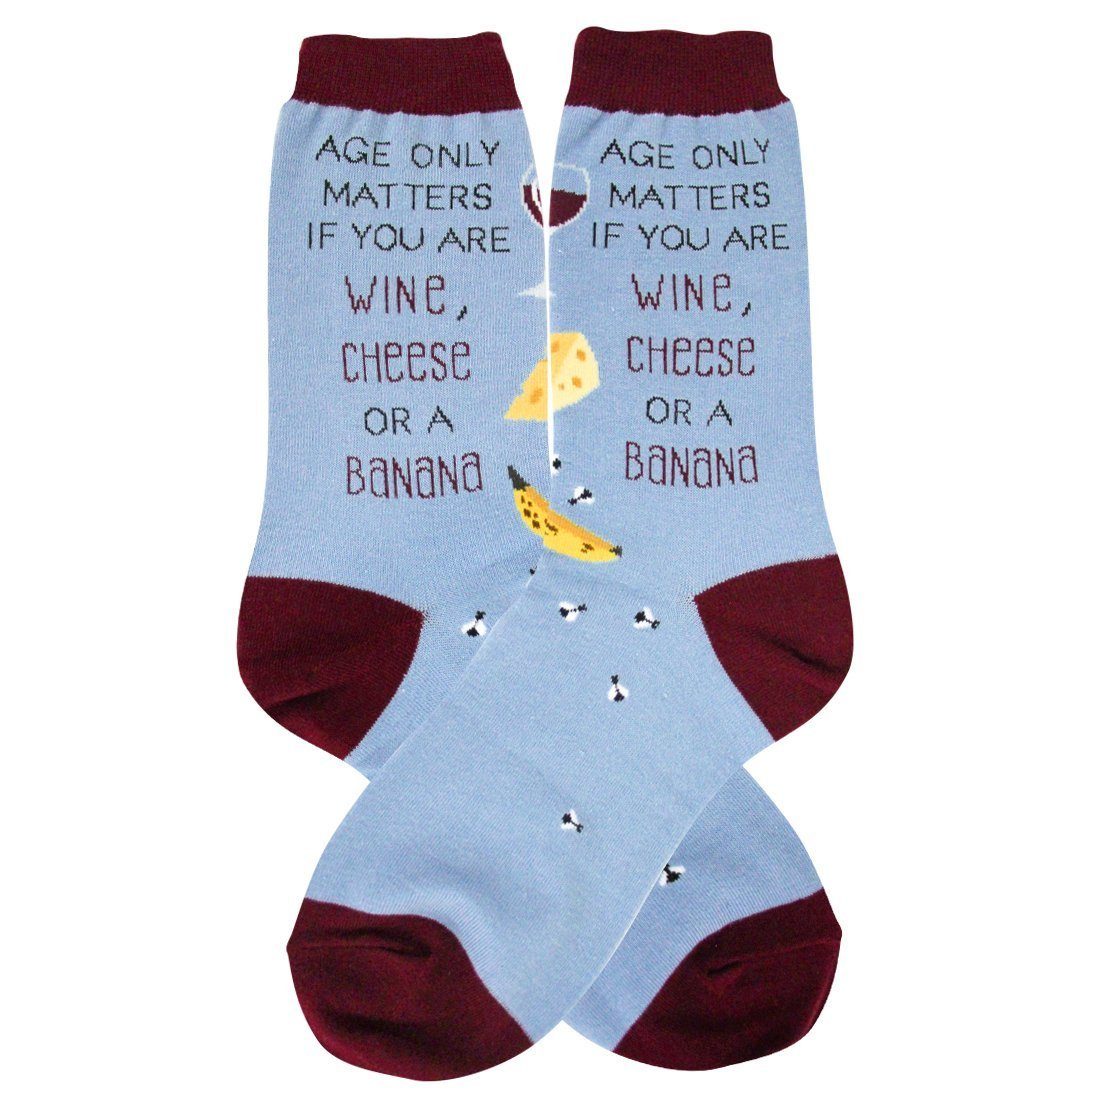 Foot Traffic - Age Only Matters Crew Socks | Women's - Knock Your Socks Off